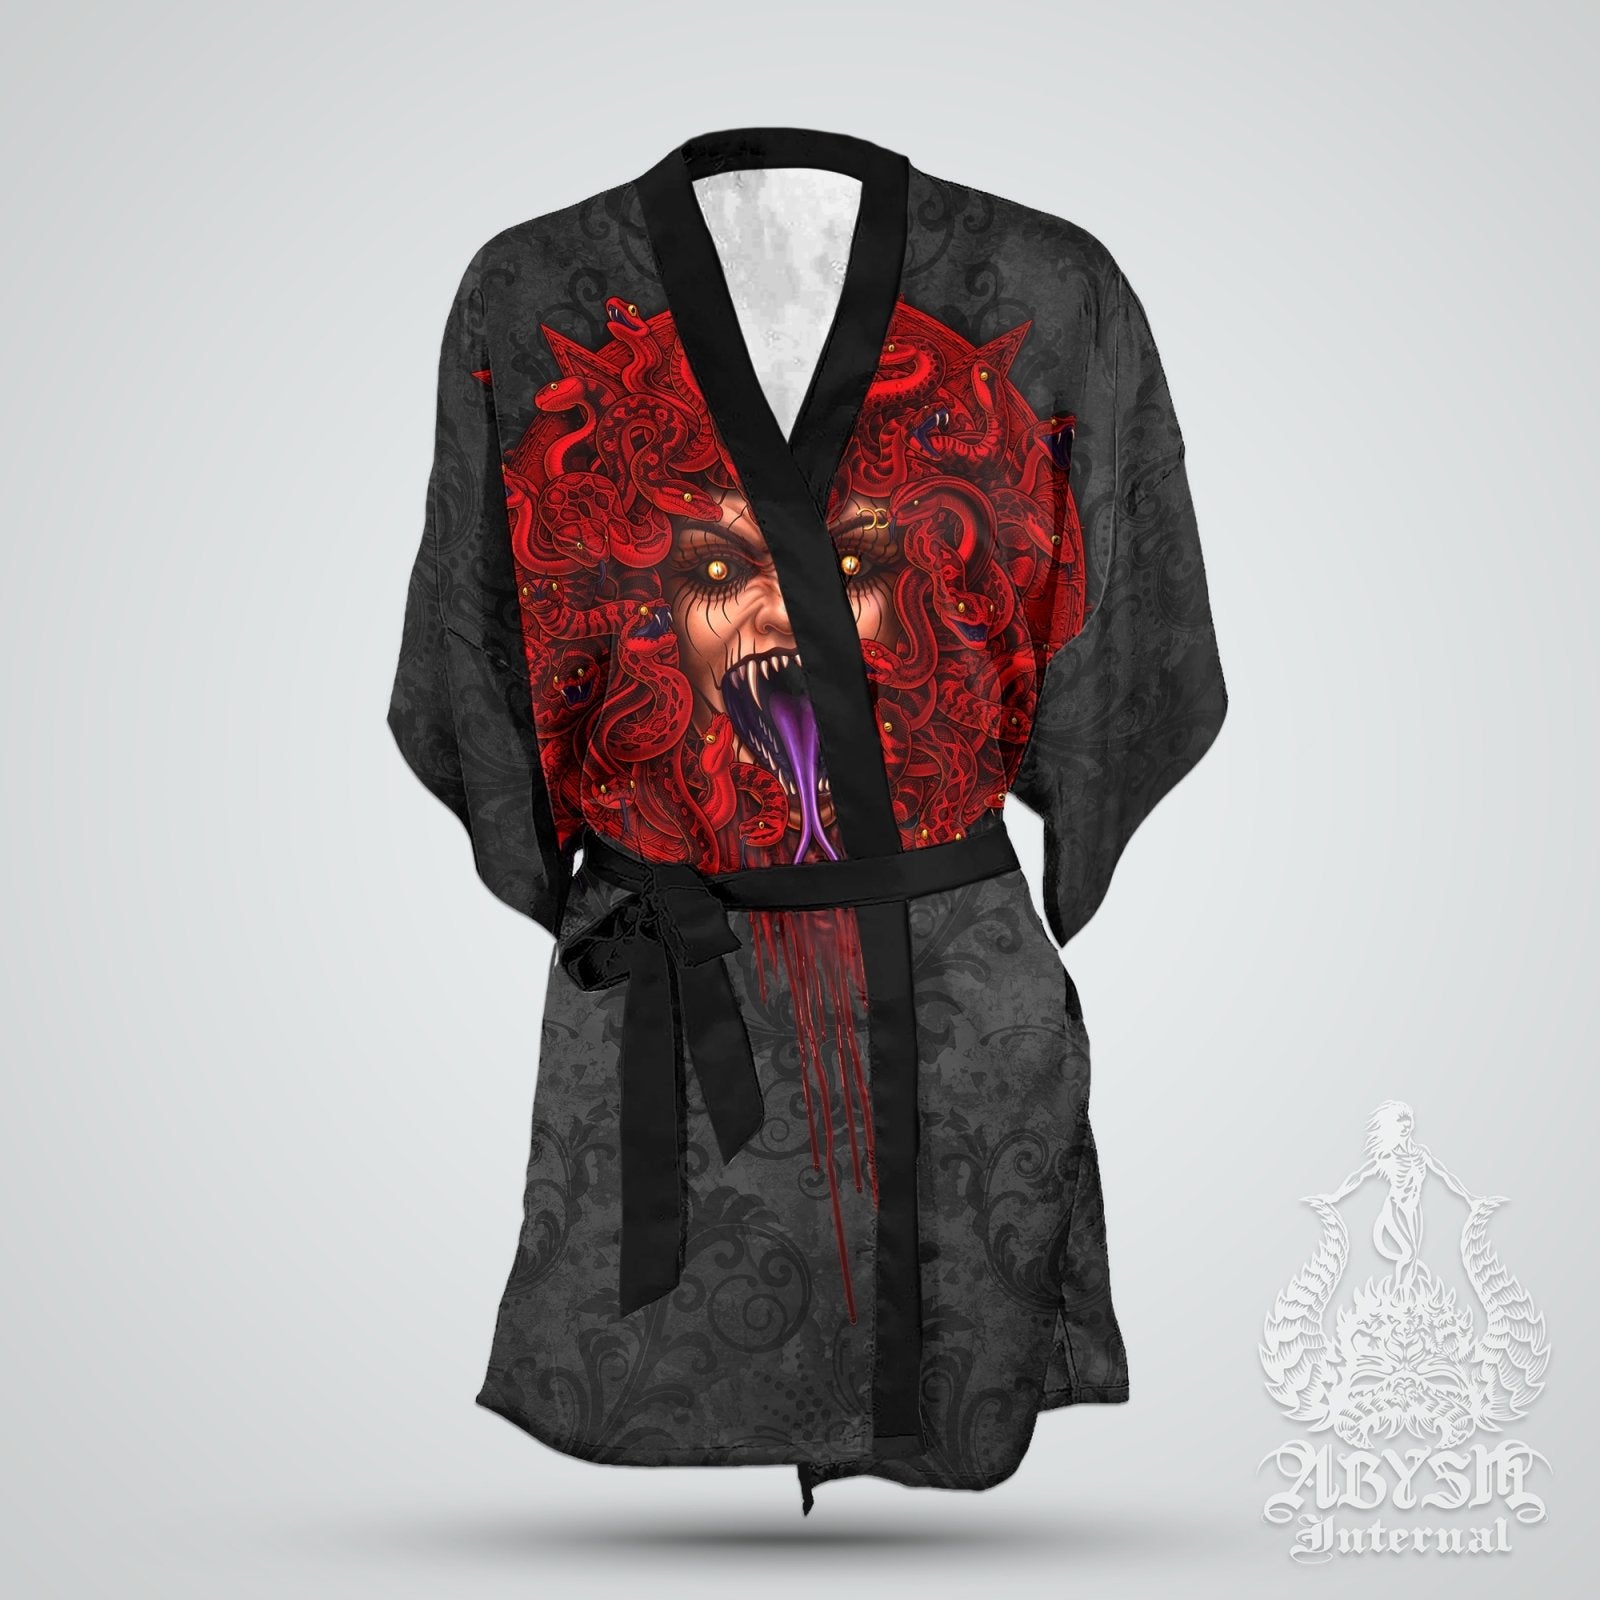 Demon Medusa Cover Up, Beach Outfit, Party Kimono, Summer Festival Robe, Satanic Indie and Alternative Clothing, Unisex - Pentagram - Abysm Internal